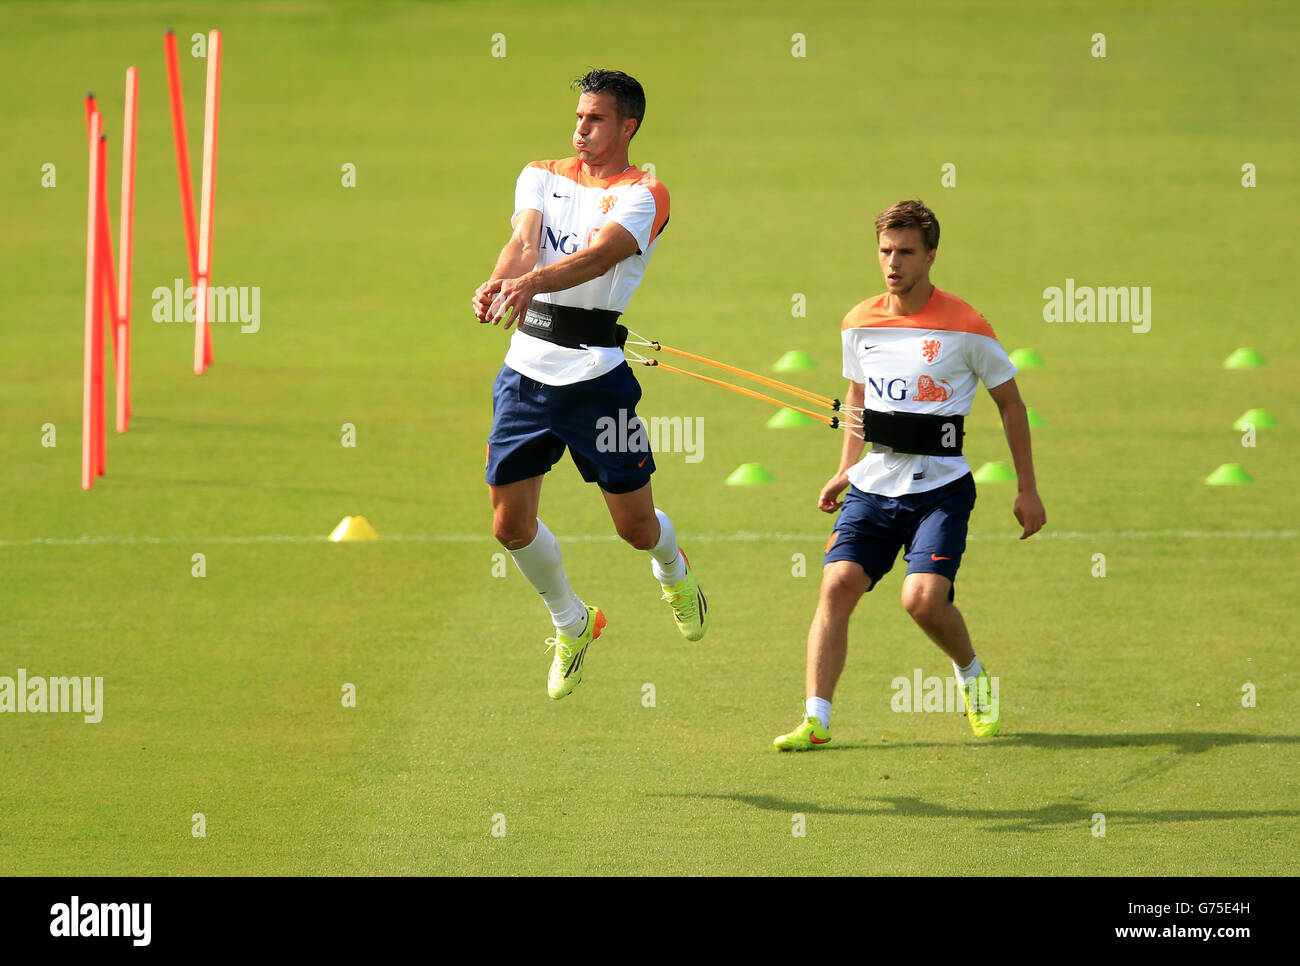 Netherlands' Robin van Persie and Joel Veltman (right) during the training session at Estadio Jose Bastos Padilha, Rio de Janeiro, Brazil. PRESS ASSOCIATION Photo. Picture date: Wednesday July 2, 2014. Photo credit should read: Mike Egerton/PA Wire. RESTRICTIONS: Editorial use only. No commercial use. No use with any unofficial 3rd party logos. No manipulation of images. No video emulation Stock Photo